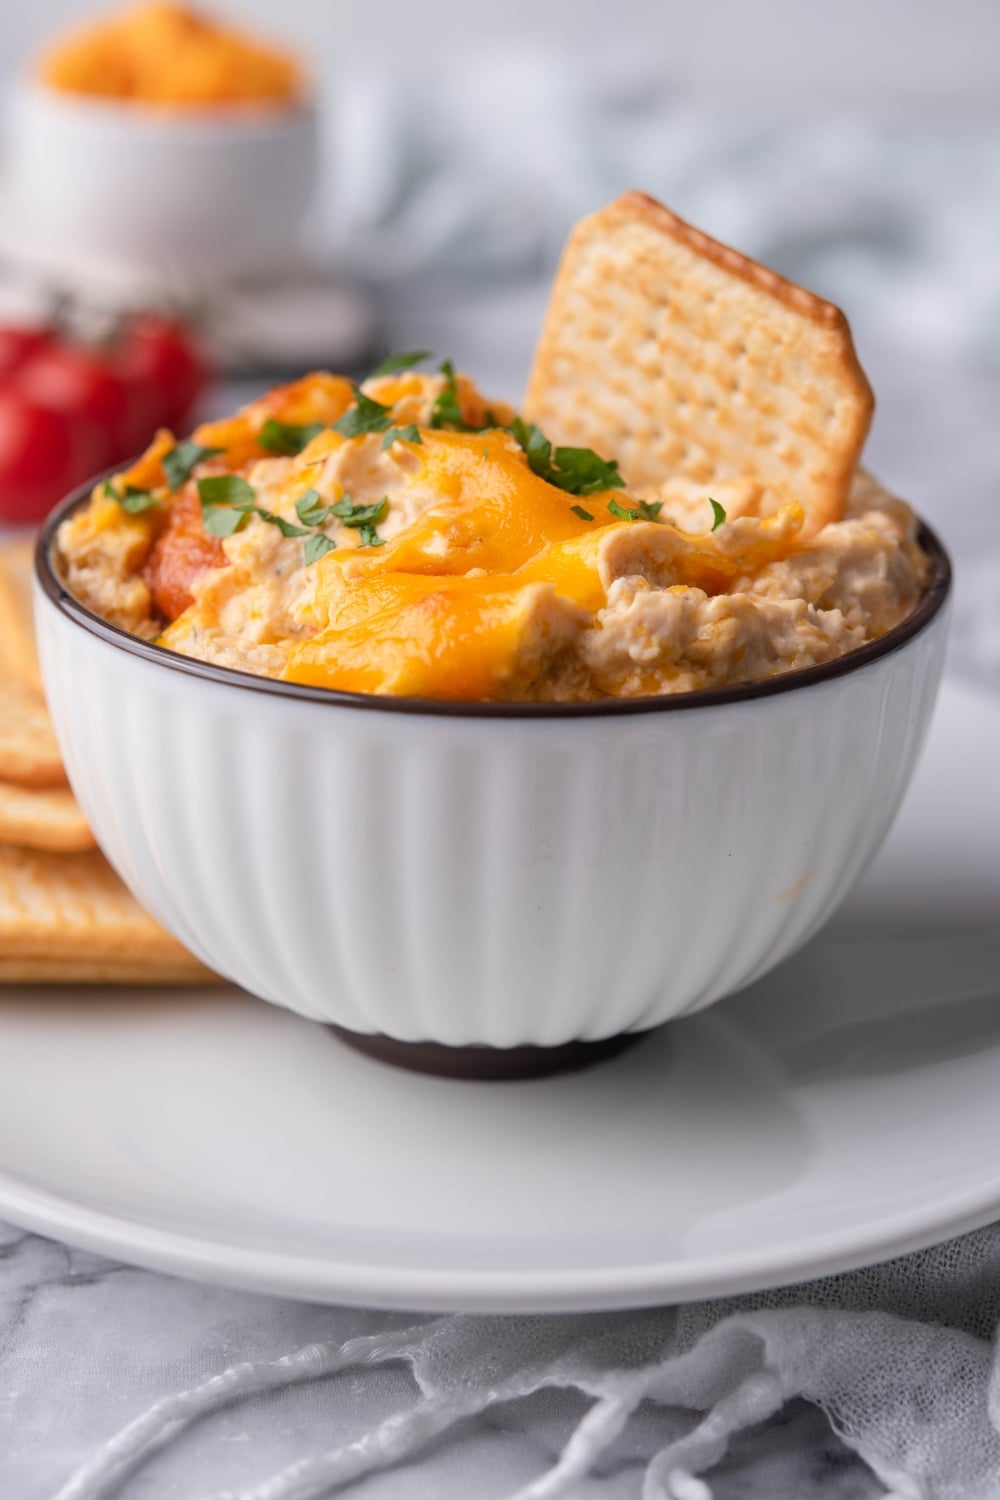 Healthy chicken dip in a bowl, garnished with parsley and topped with a cracker for dipping. The bowl is on a plate with more crackers.